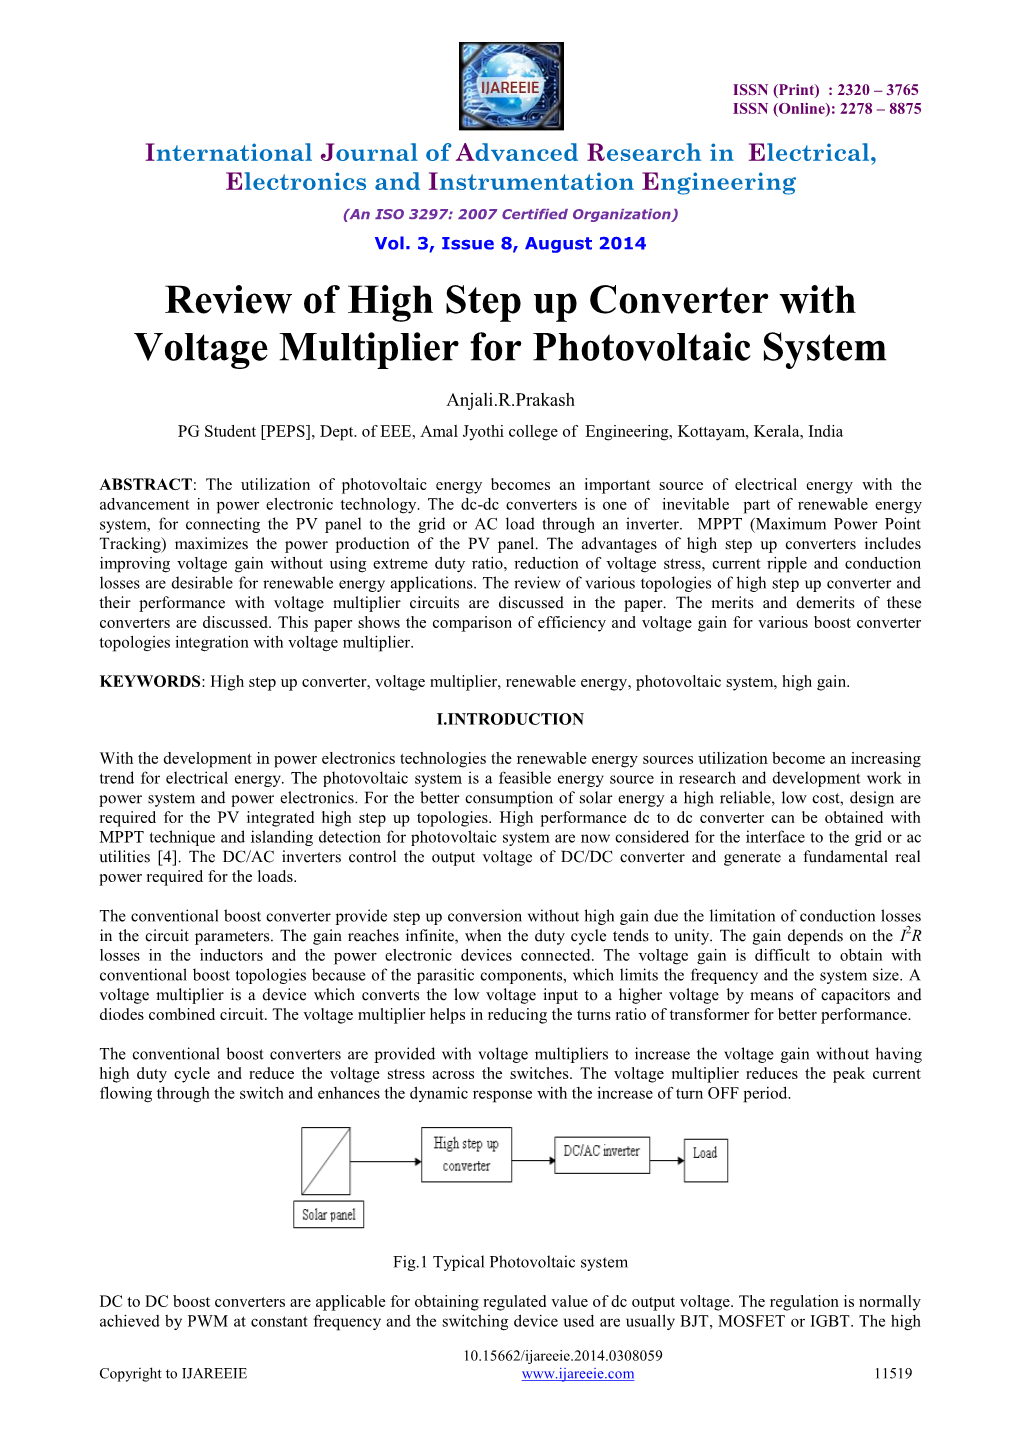 Review of High Step up Converter with Voltage Multiplier for Photovoltaic System